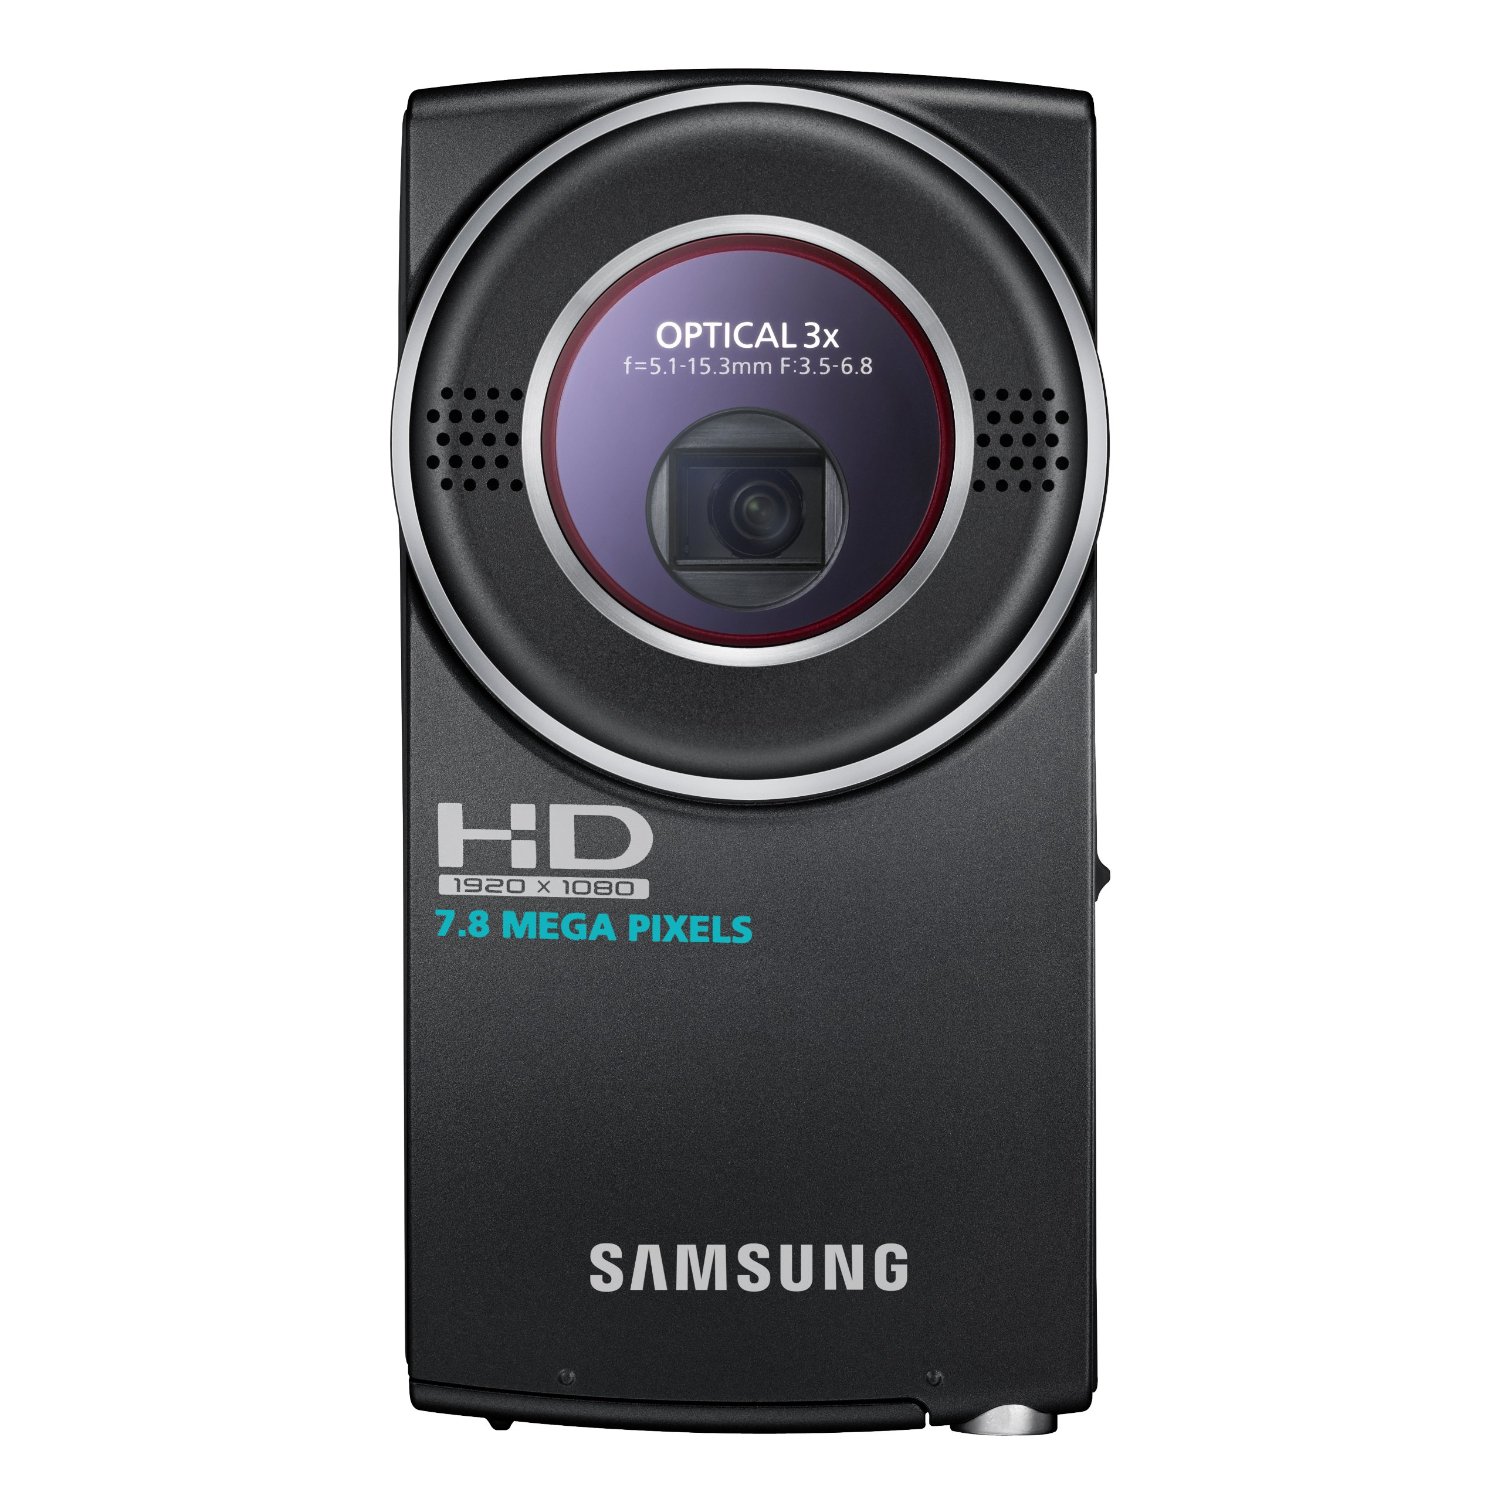 http://thetechjournal.com/wp-content/uploads/images/1108/1313897478-samsung-hmxu20-ultracompact-fullhd-camcorder-1.jpg